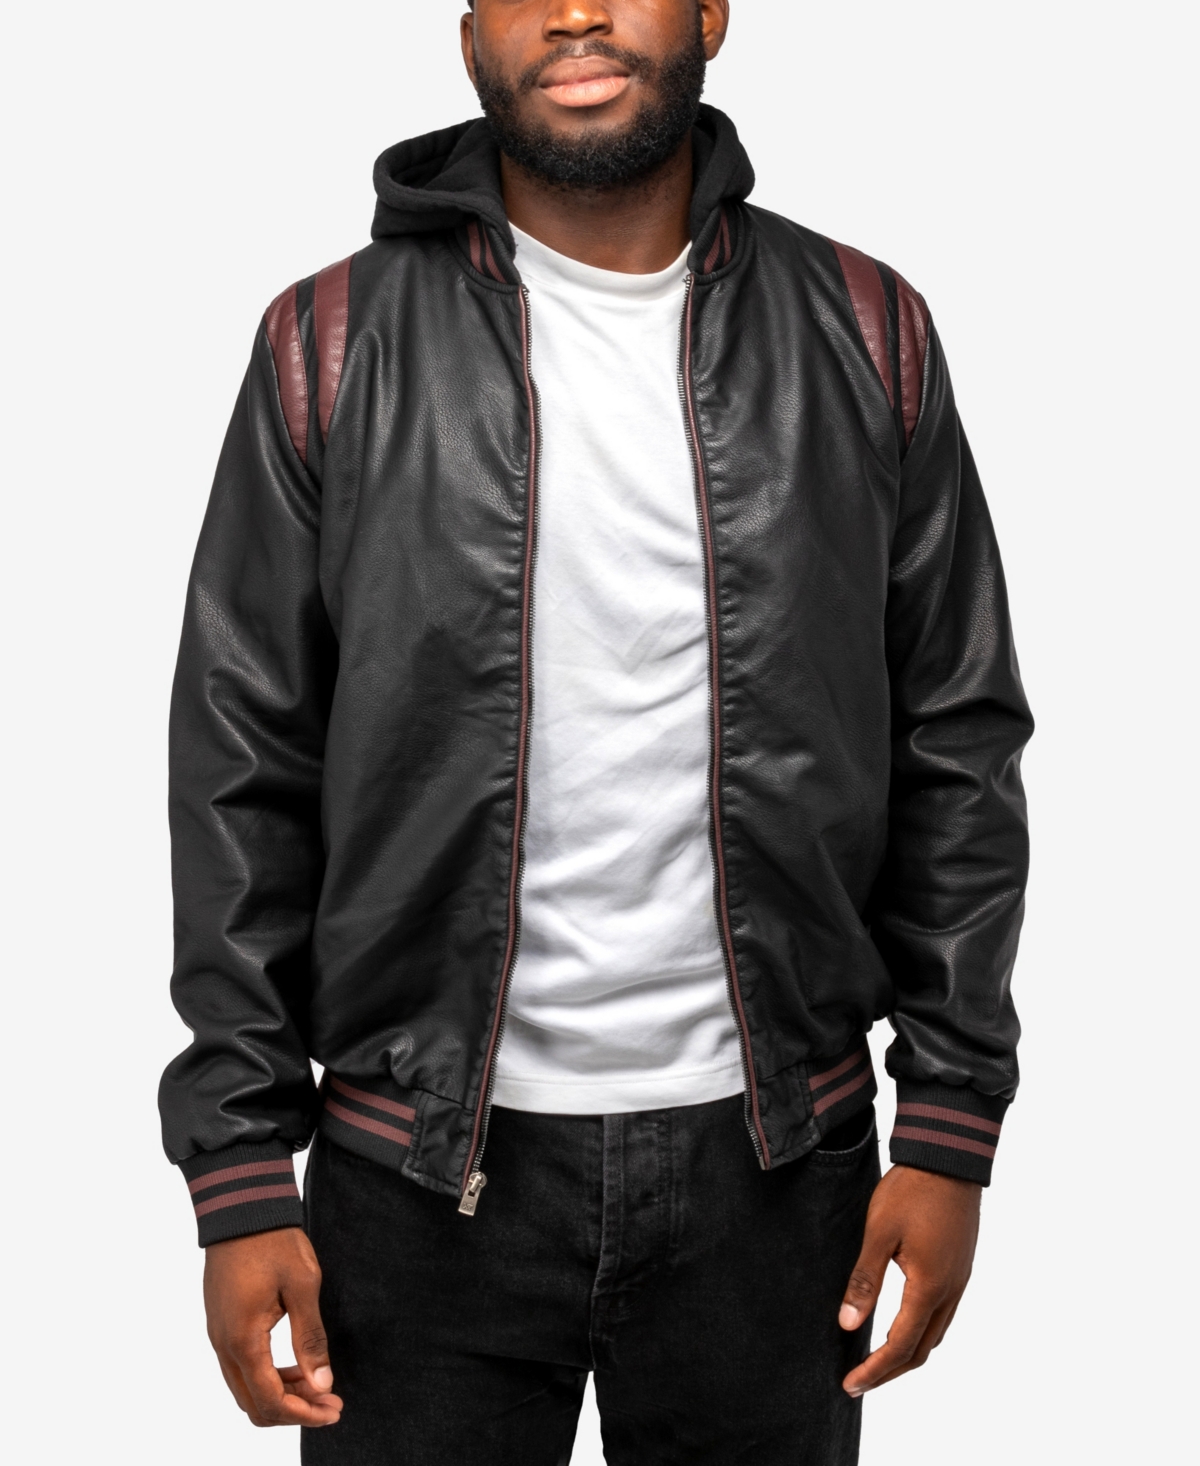 X-ray Men's Grainy Polyurethane Hooded Jacket With Faux Shearling Lining In Black,burgundy